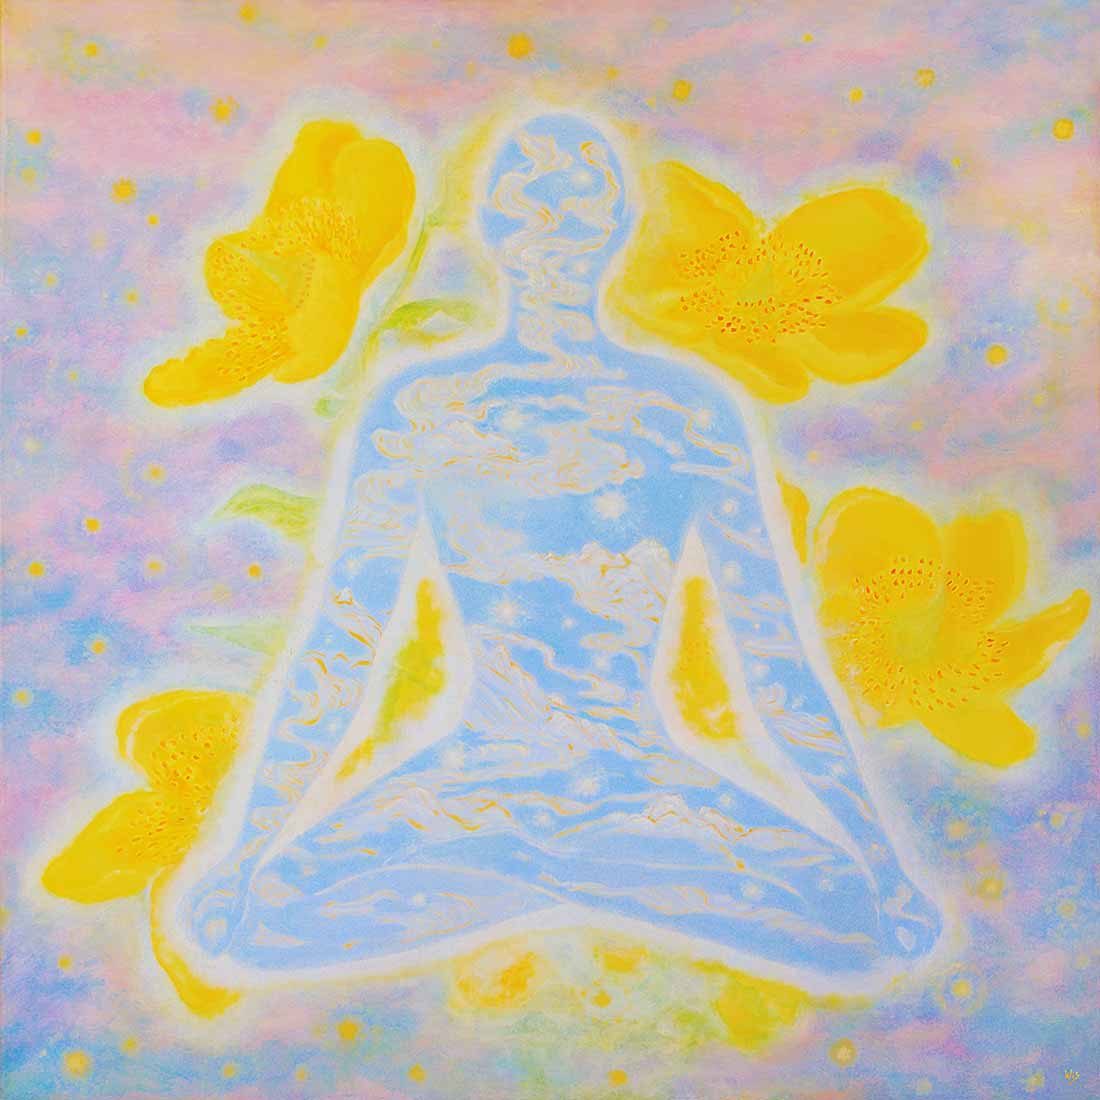 This painting, 'All is Transparent Mr. Buddha,' features Lord Buddha among yellow flowers with landscapes, skies, and stars forming inside his silhouette.